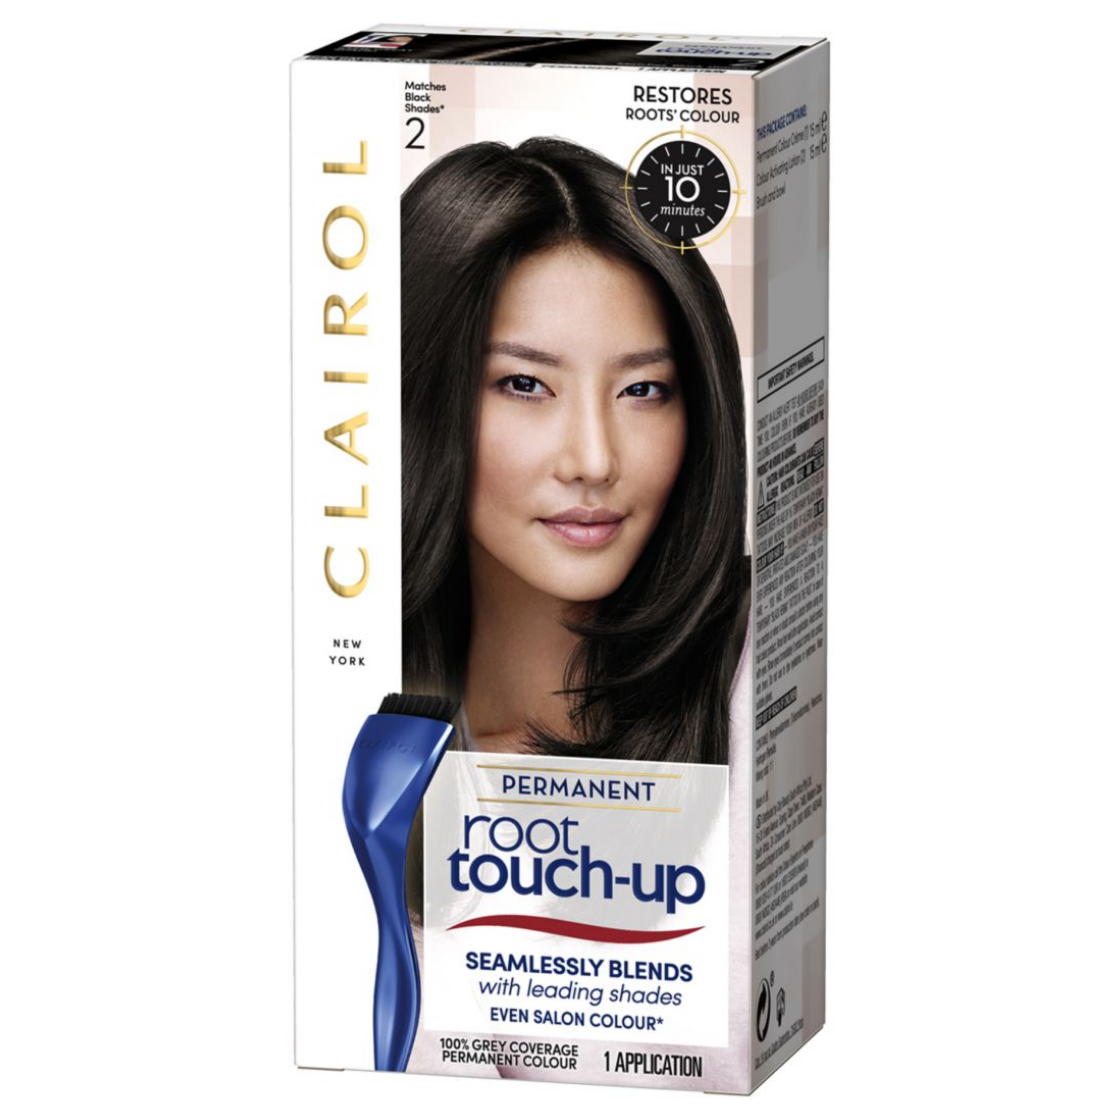 Clairol Root Touchup Permanent Hair Color  5g Medium Golden Brown  1 Kit   Target